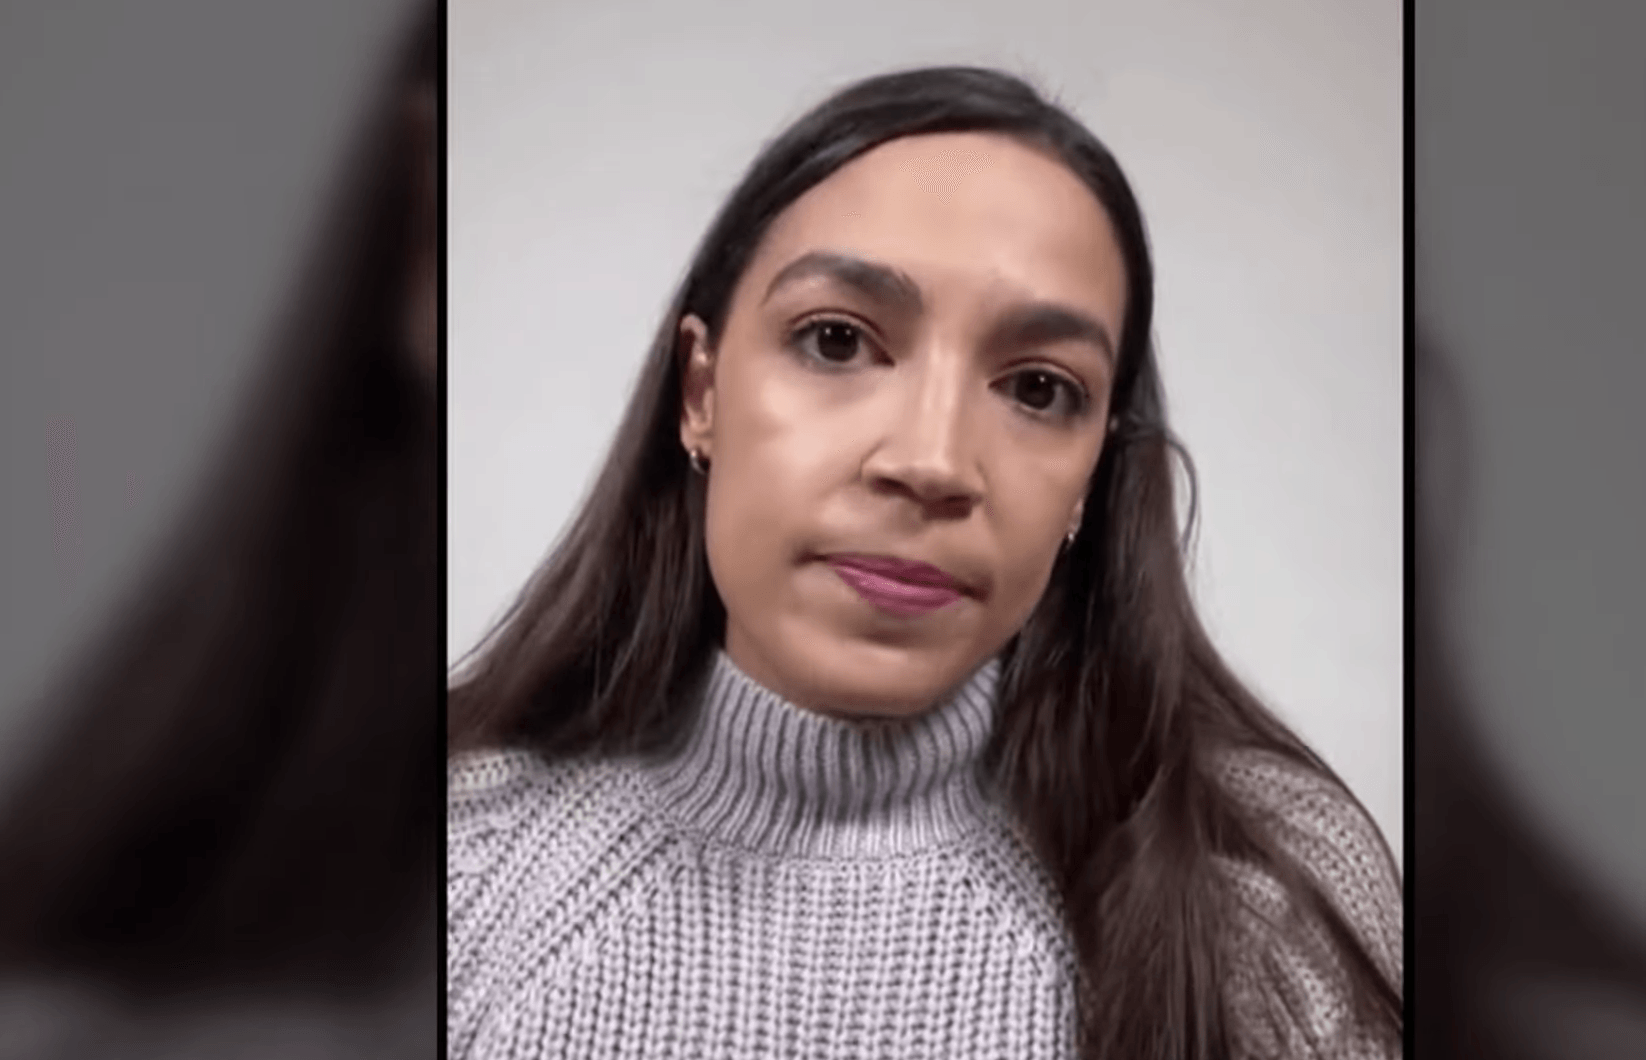 AOC Likens Some Lawmakers To 